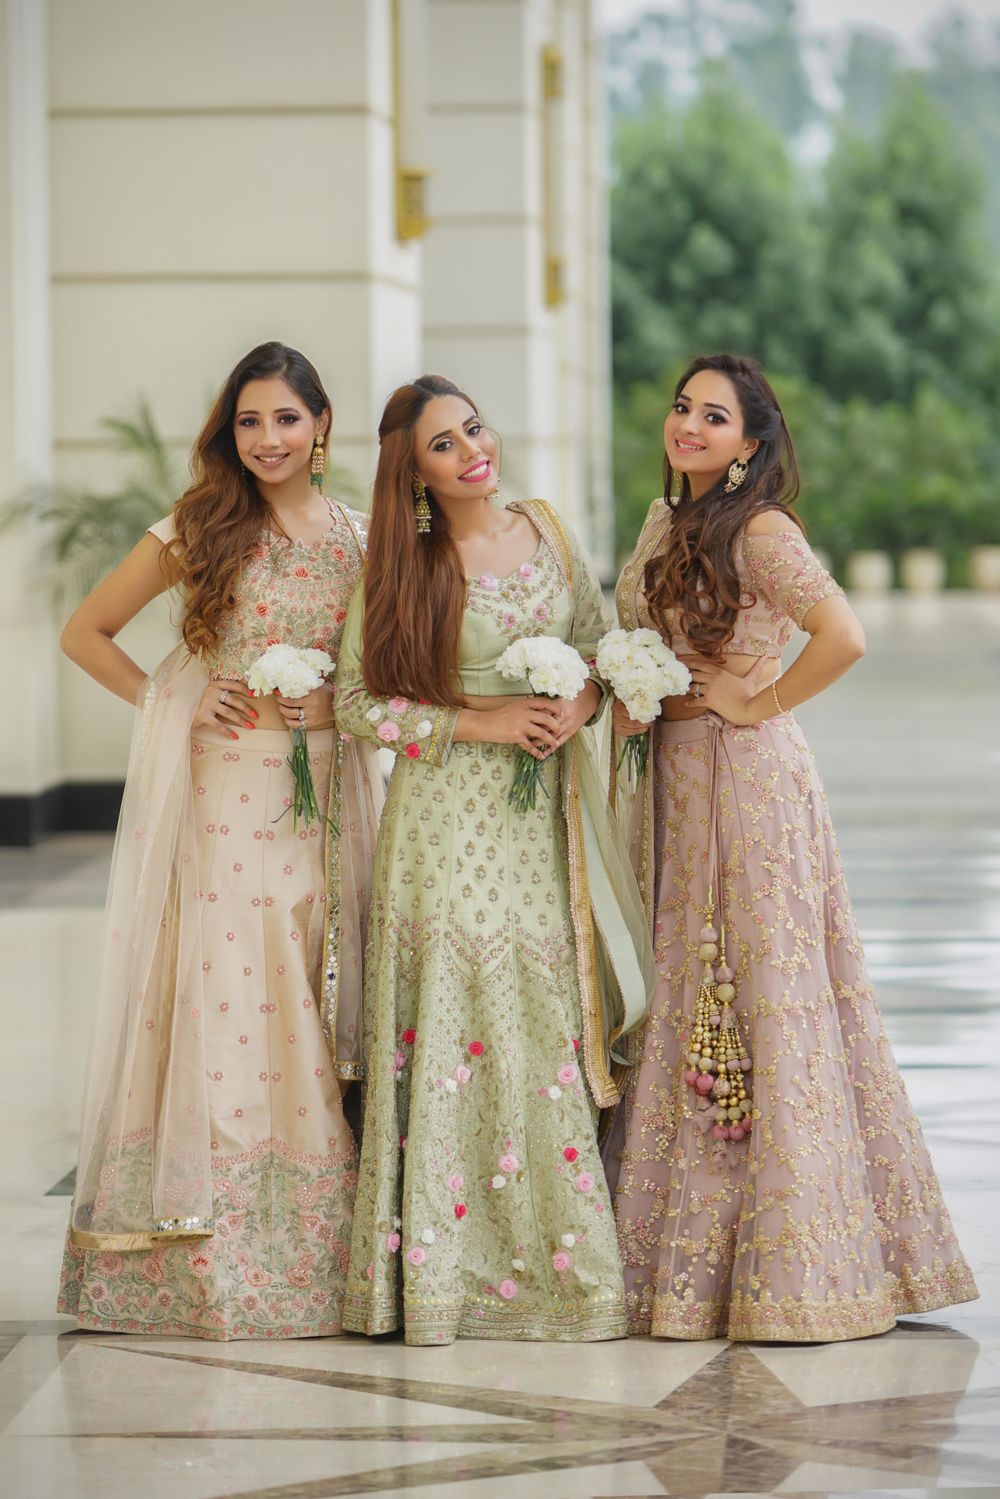 Photo of Matching bride and bridesmaids in pastel